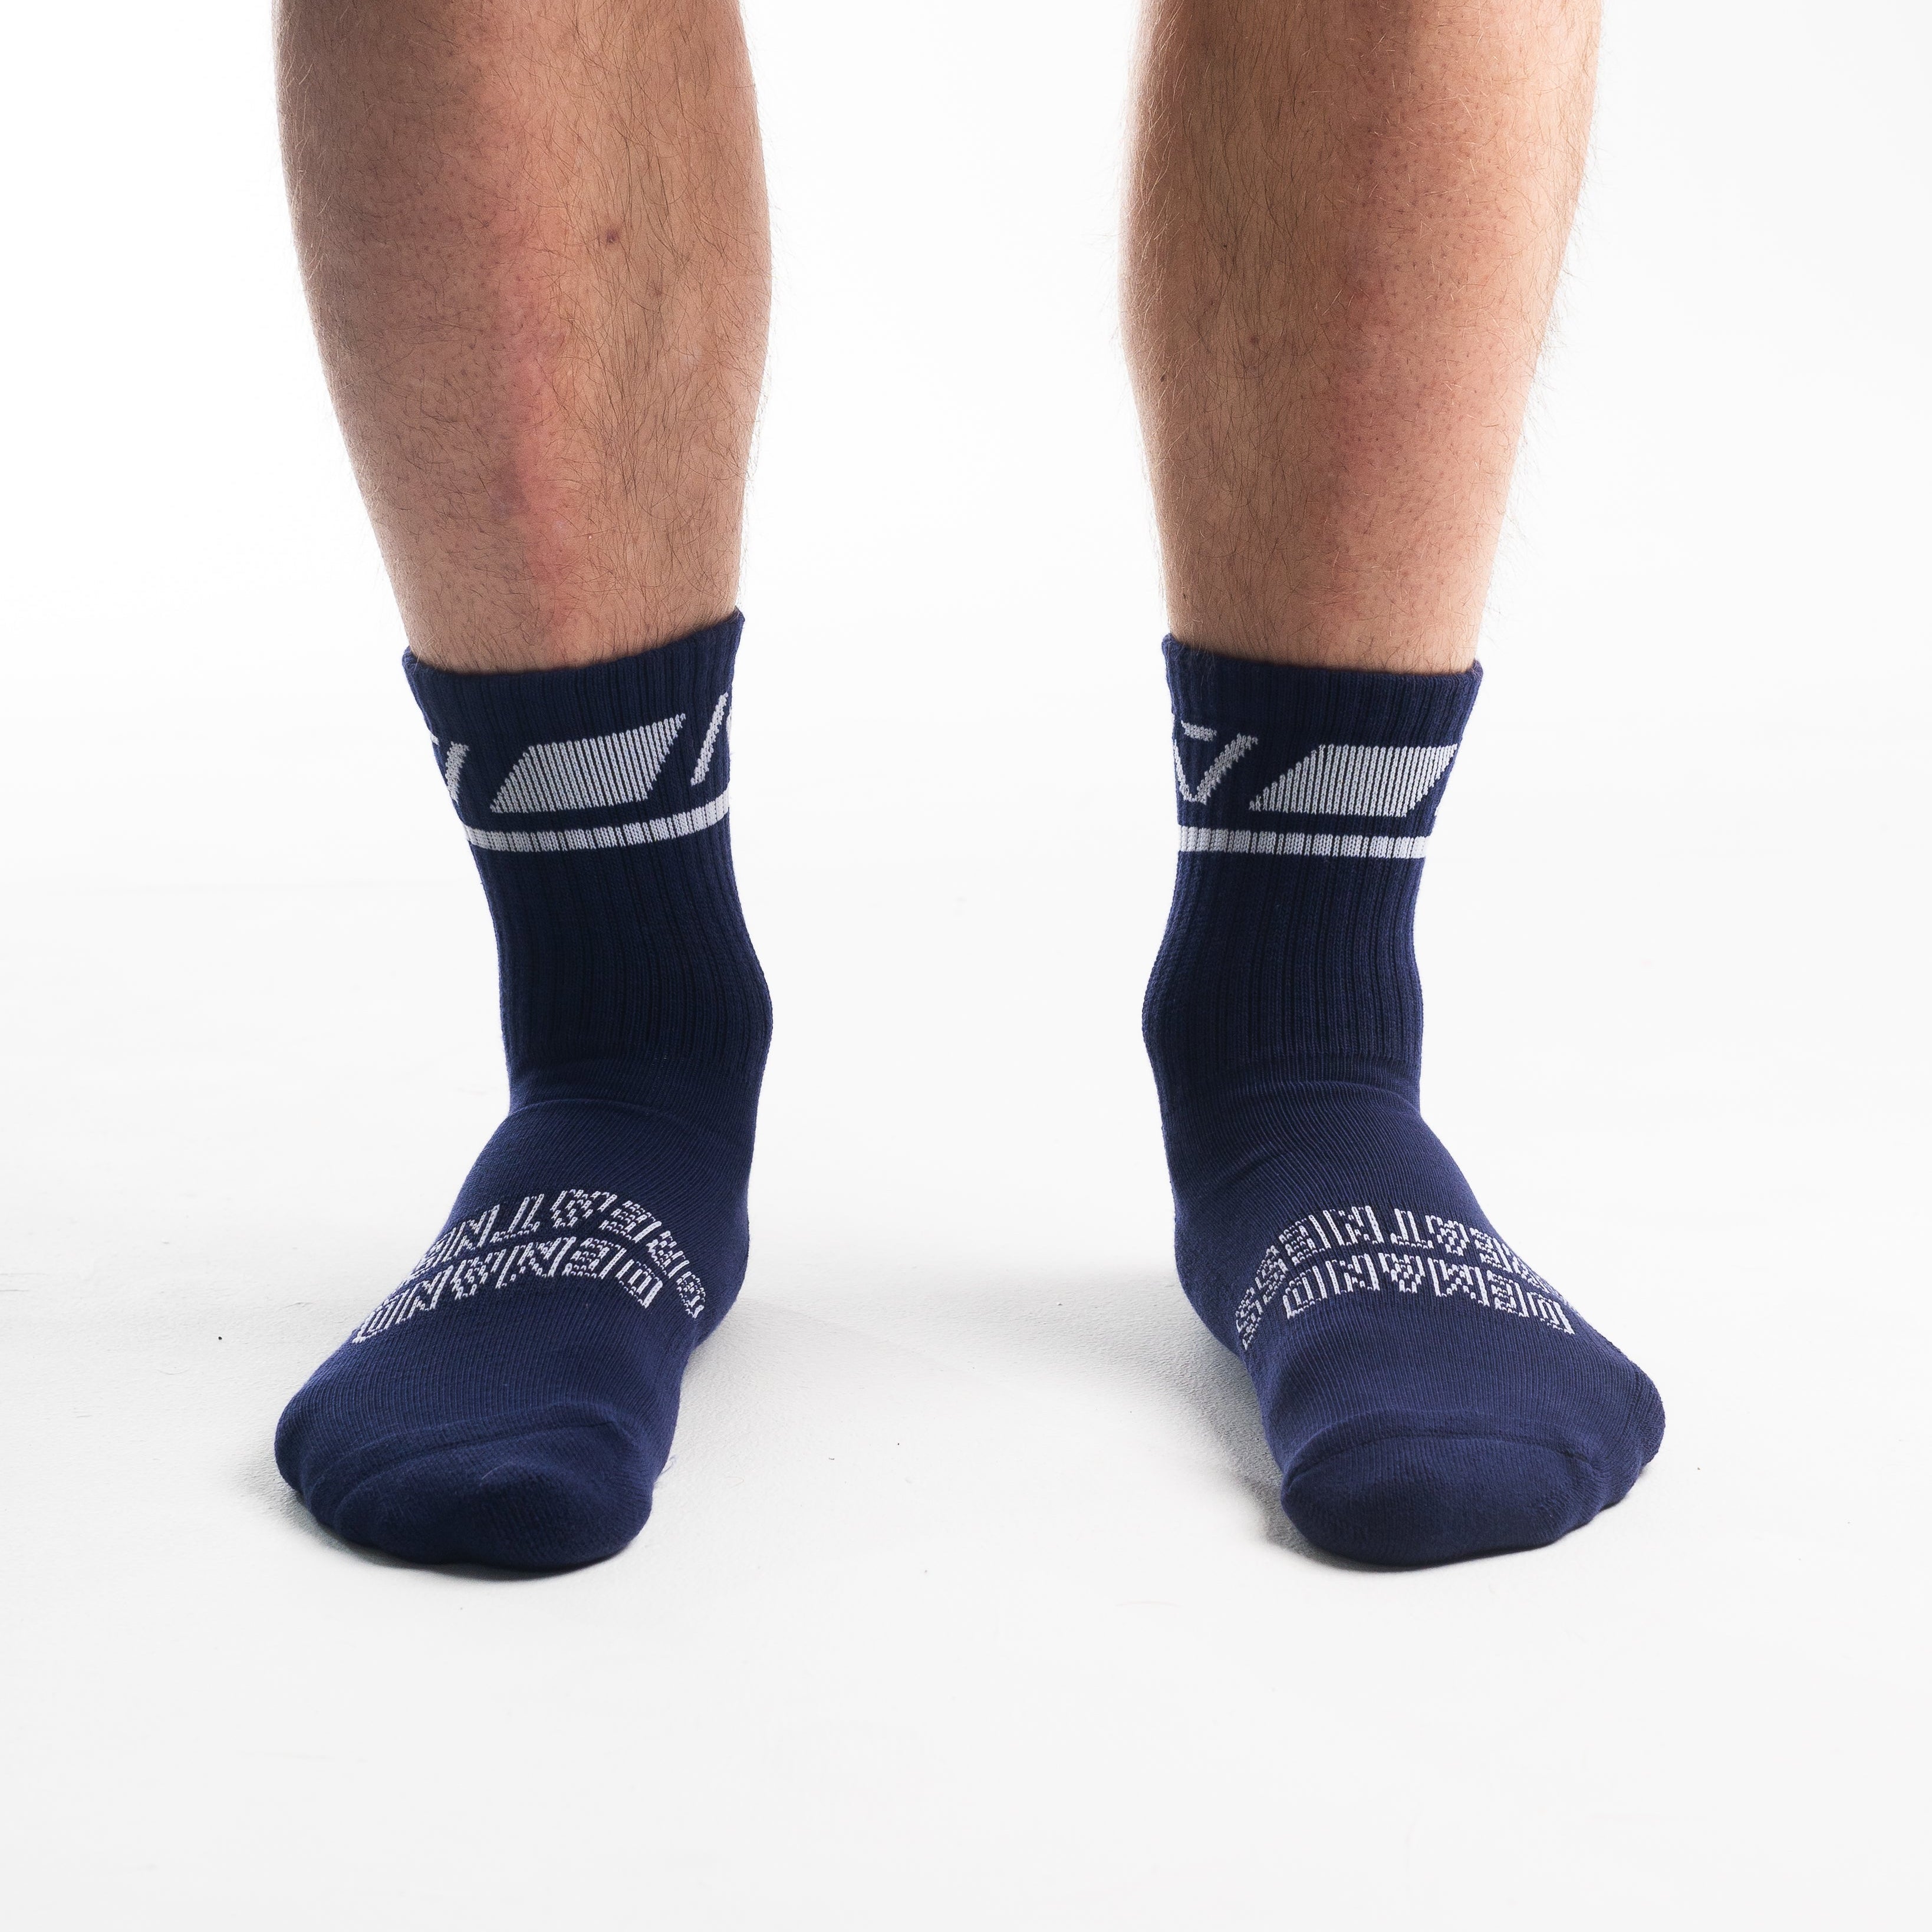 A7 Night Light Crew socks showcase white and blue logos and let your energy show on the platform, in your training or while out and about. The IPF Approved Night Light Meet Kit includes Powerlifting Singlet, A7 Meet Shirt, A7 Zebra Wrist Wraps, A7 Deadlift Socks, Hourglass Knee Sleeves (Stiff Knee Sleeves and Rigor Mortis Knee Sleeves). All A7 Powerlifting Equipment shipping to UK, Norway, Switzerland 